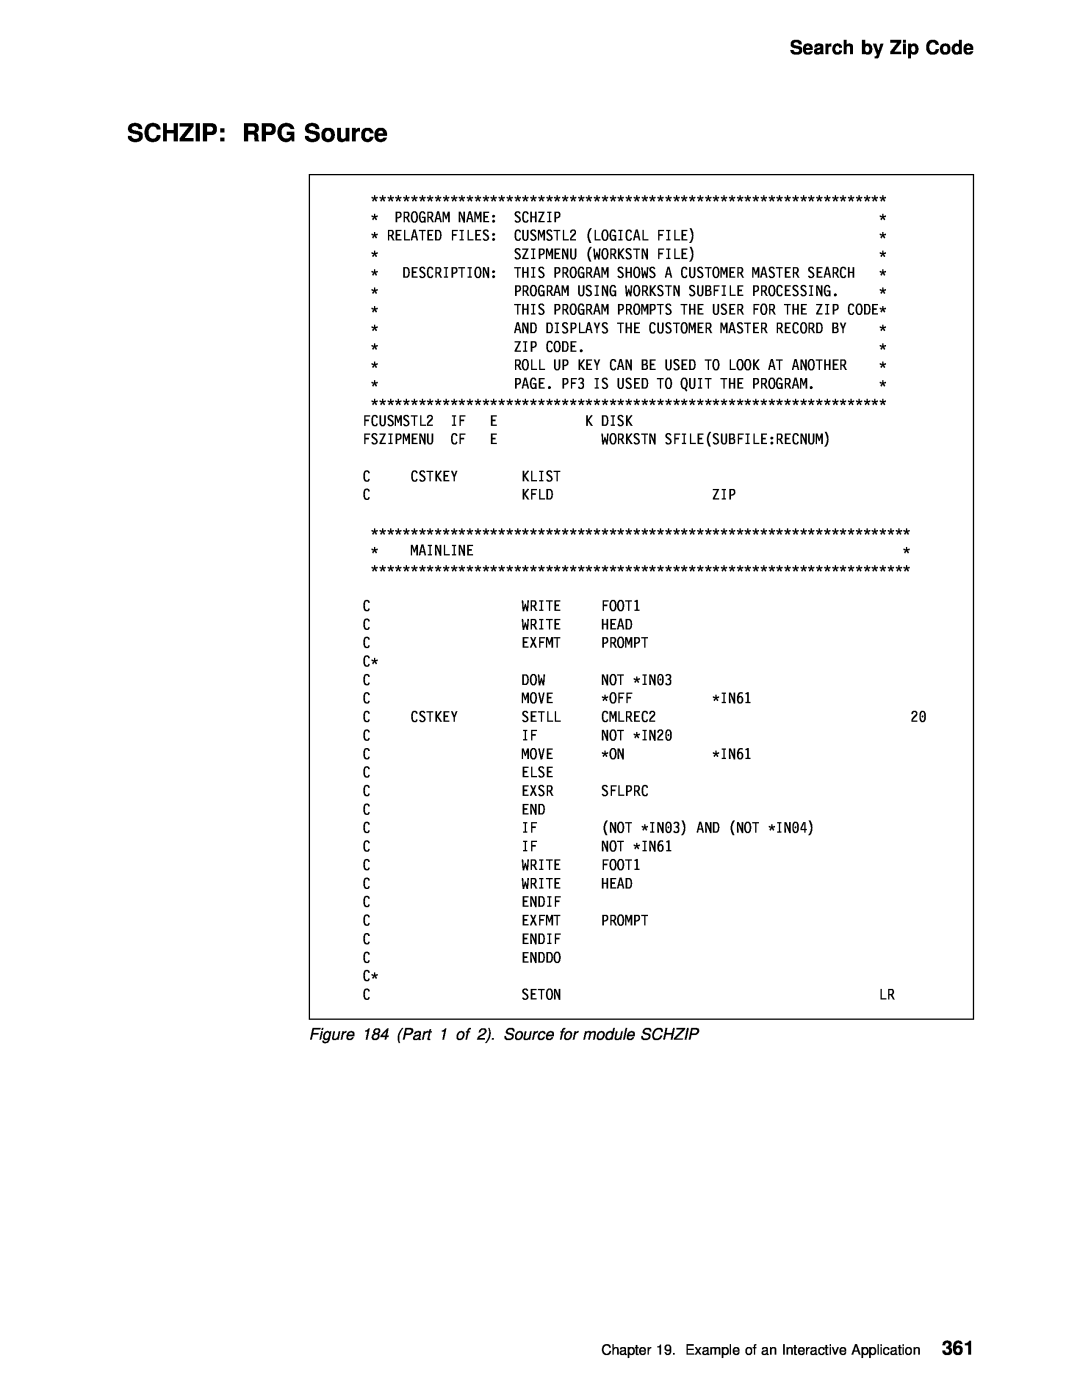 IBM AS/400 manual SCHZIP RPG Source, Search by Zip Code, Example of an Interactive 361Application 